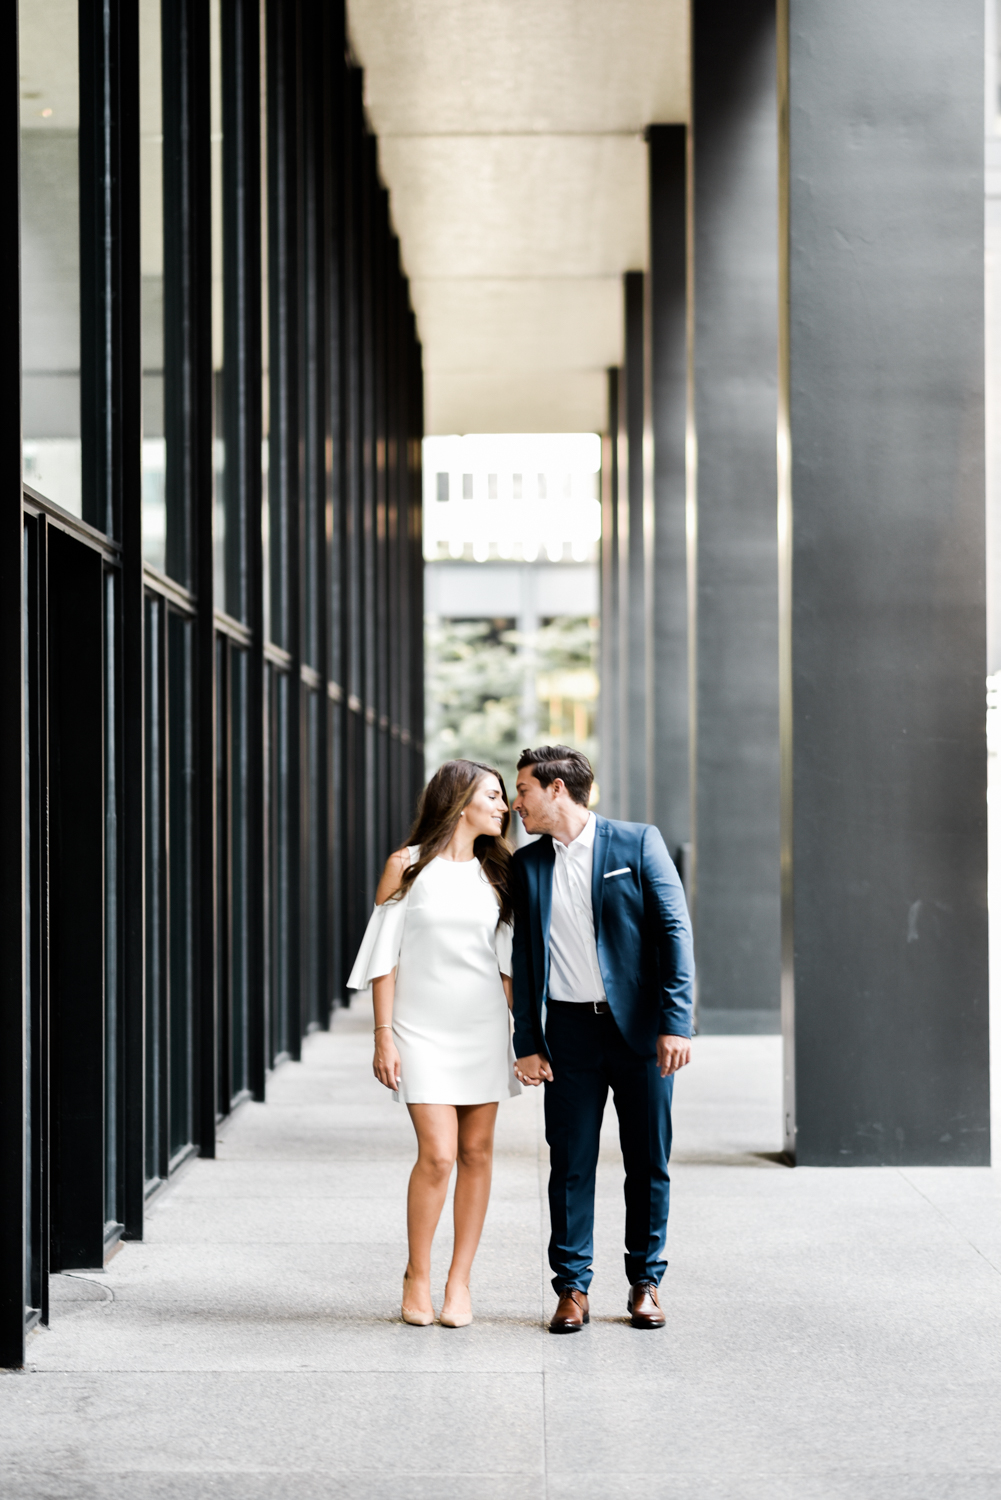 Wedding photo at TD tower in toronto